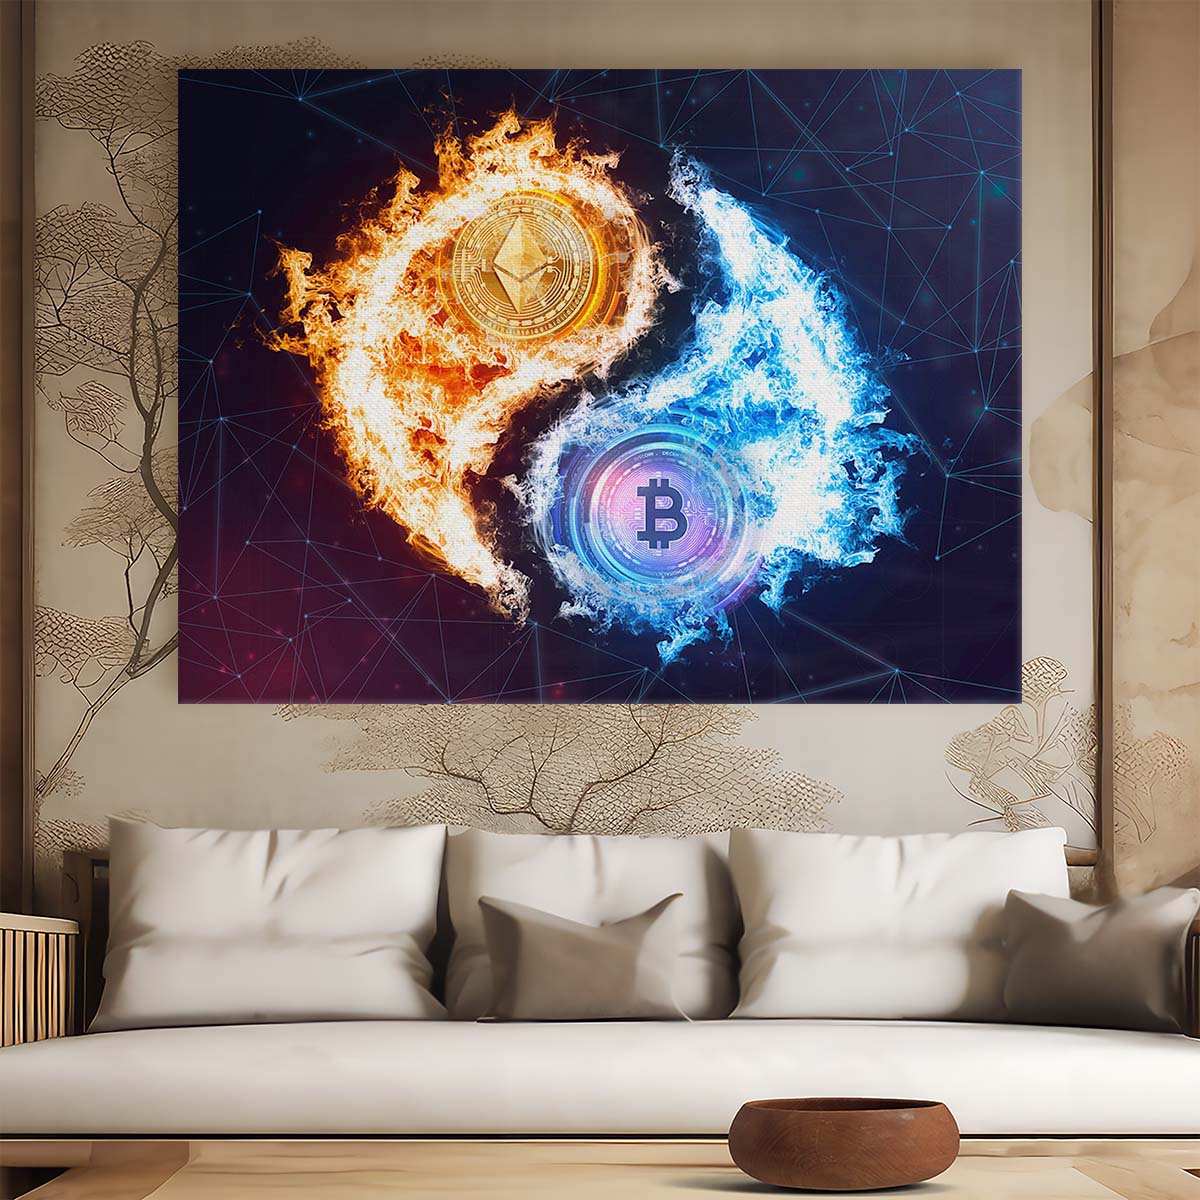 Bitcoin and Ethereum Yin-Yang Wall Art by Luxuriance Designs. Made in USA.